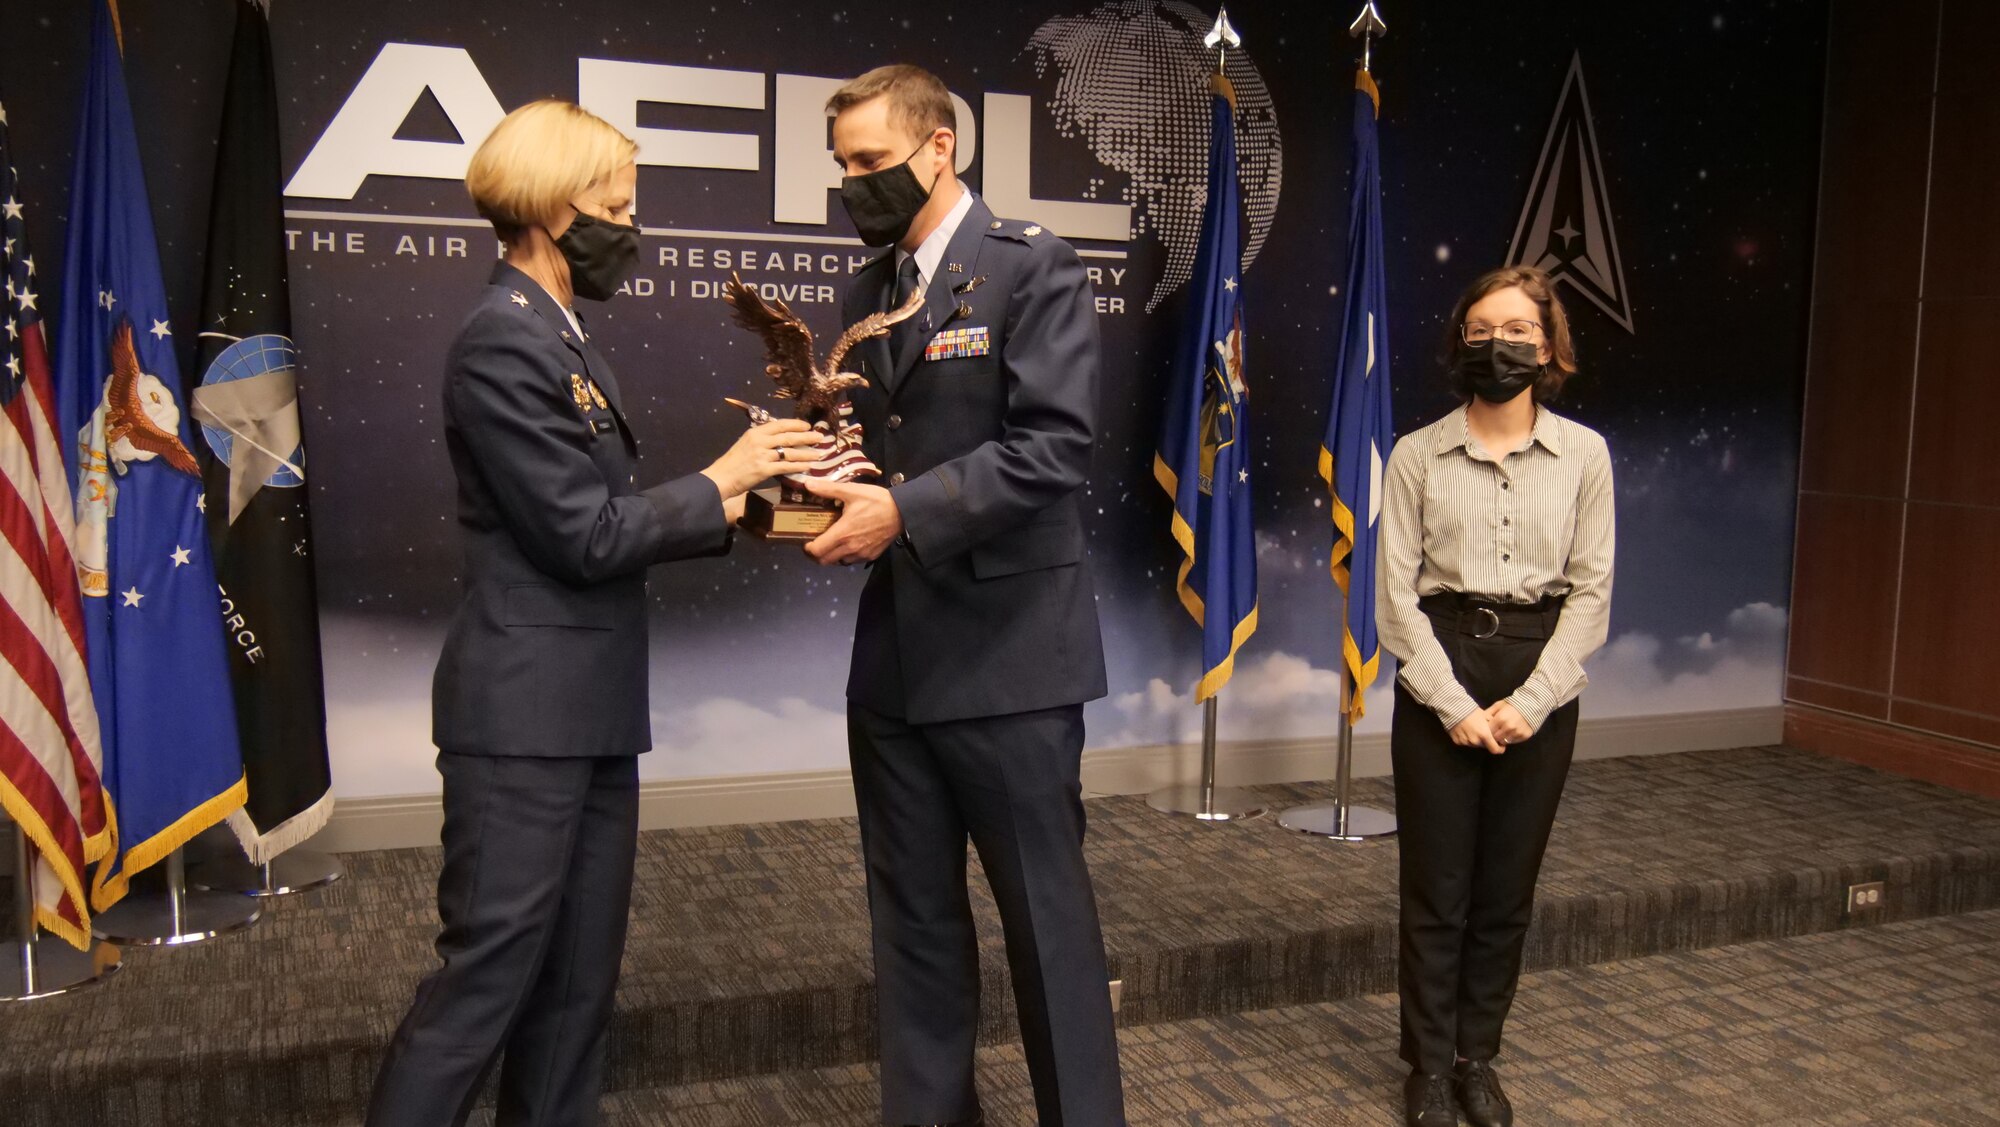 Maj. Gen. Heather Pringle, AFRL commander, presents the Richard Neal Special Recognition Award for a Senior Individual to Judson McCarty, of the AFRL Systems Technology Office, March 1, 2022 at the AFRL Annual Awards Ceremony at Wright-Patterson Air Force Base, Ohio. Accepting the award on behalf of Mr. McCarty is Lt. Col. Nathaniel Liefer. Abby Neal, daughter of Richard Neal, looks on. (U.S. Air Force photo/Keith Lewis)